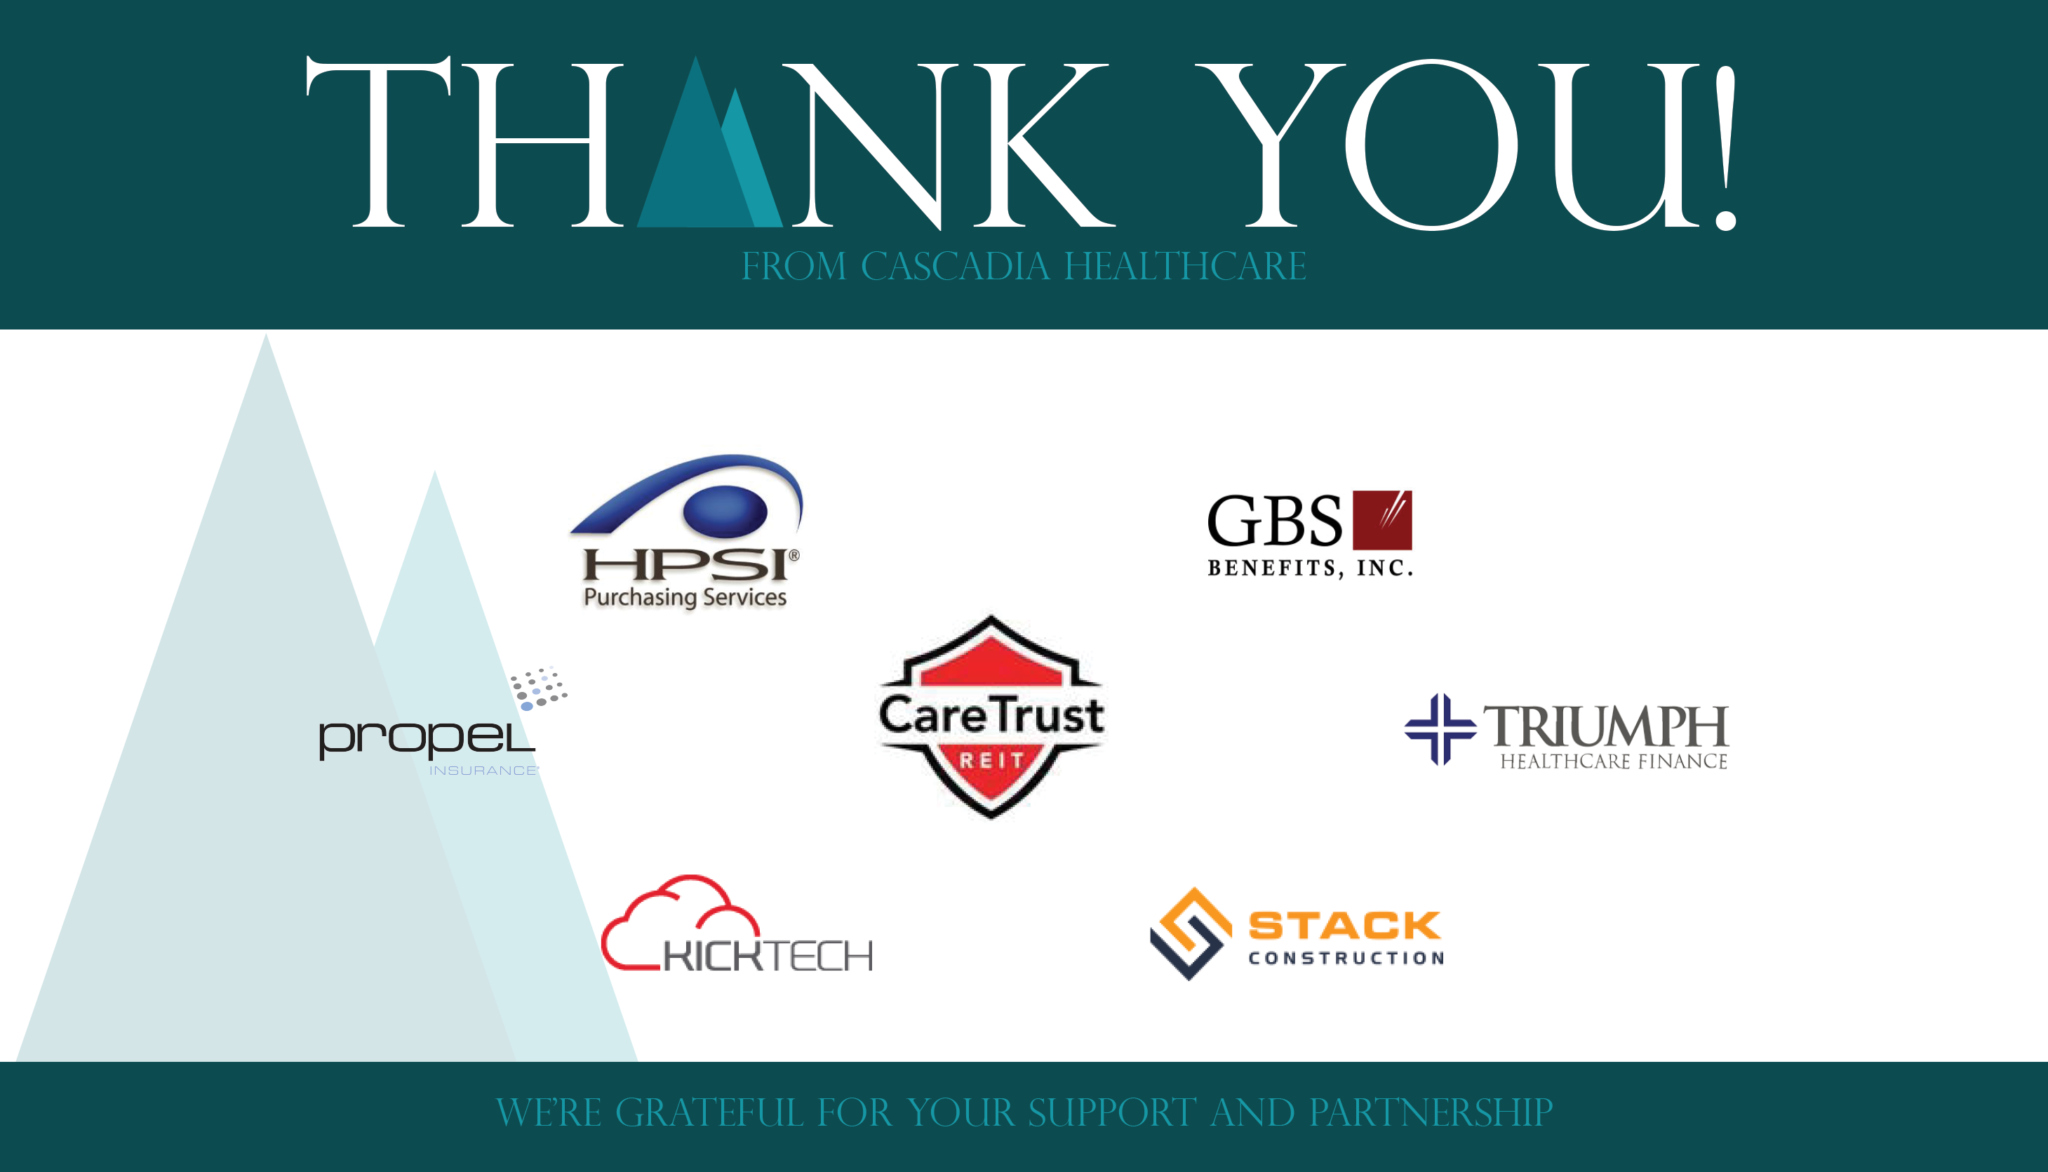 Thank you to all of our partners!